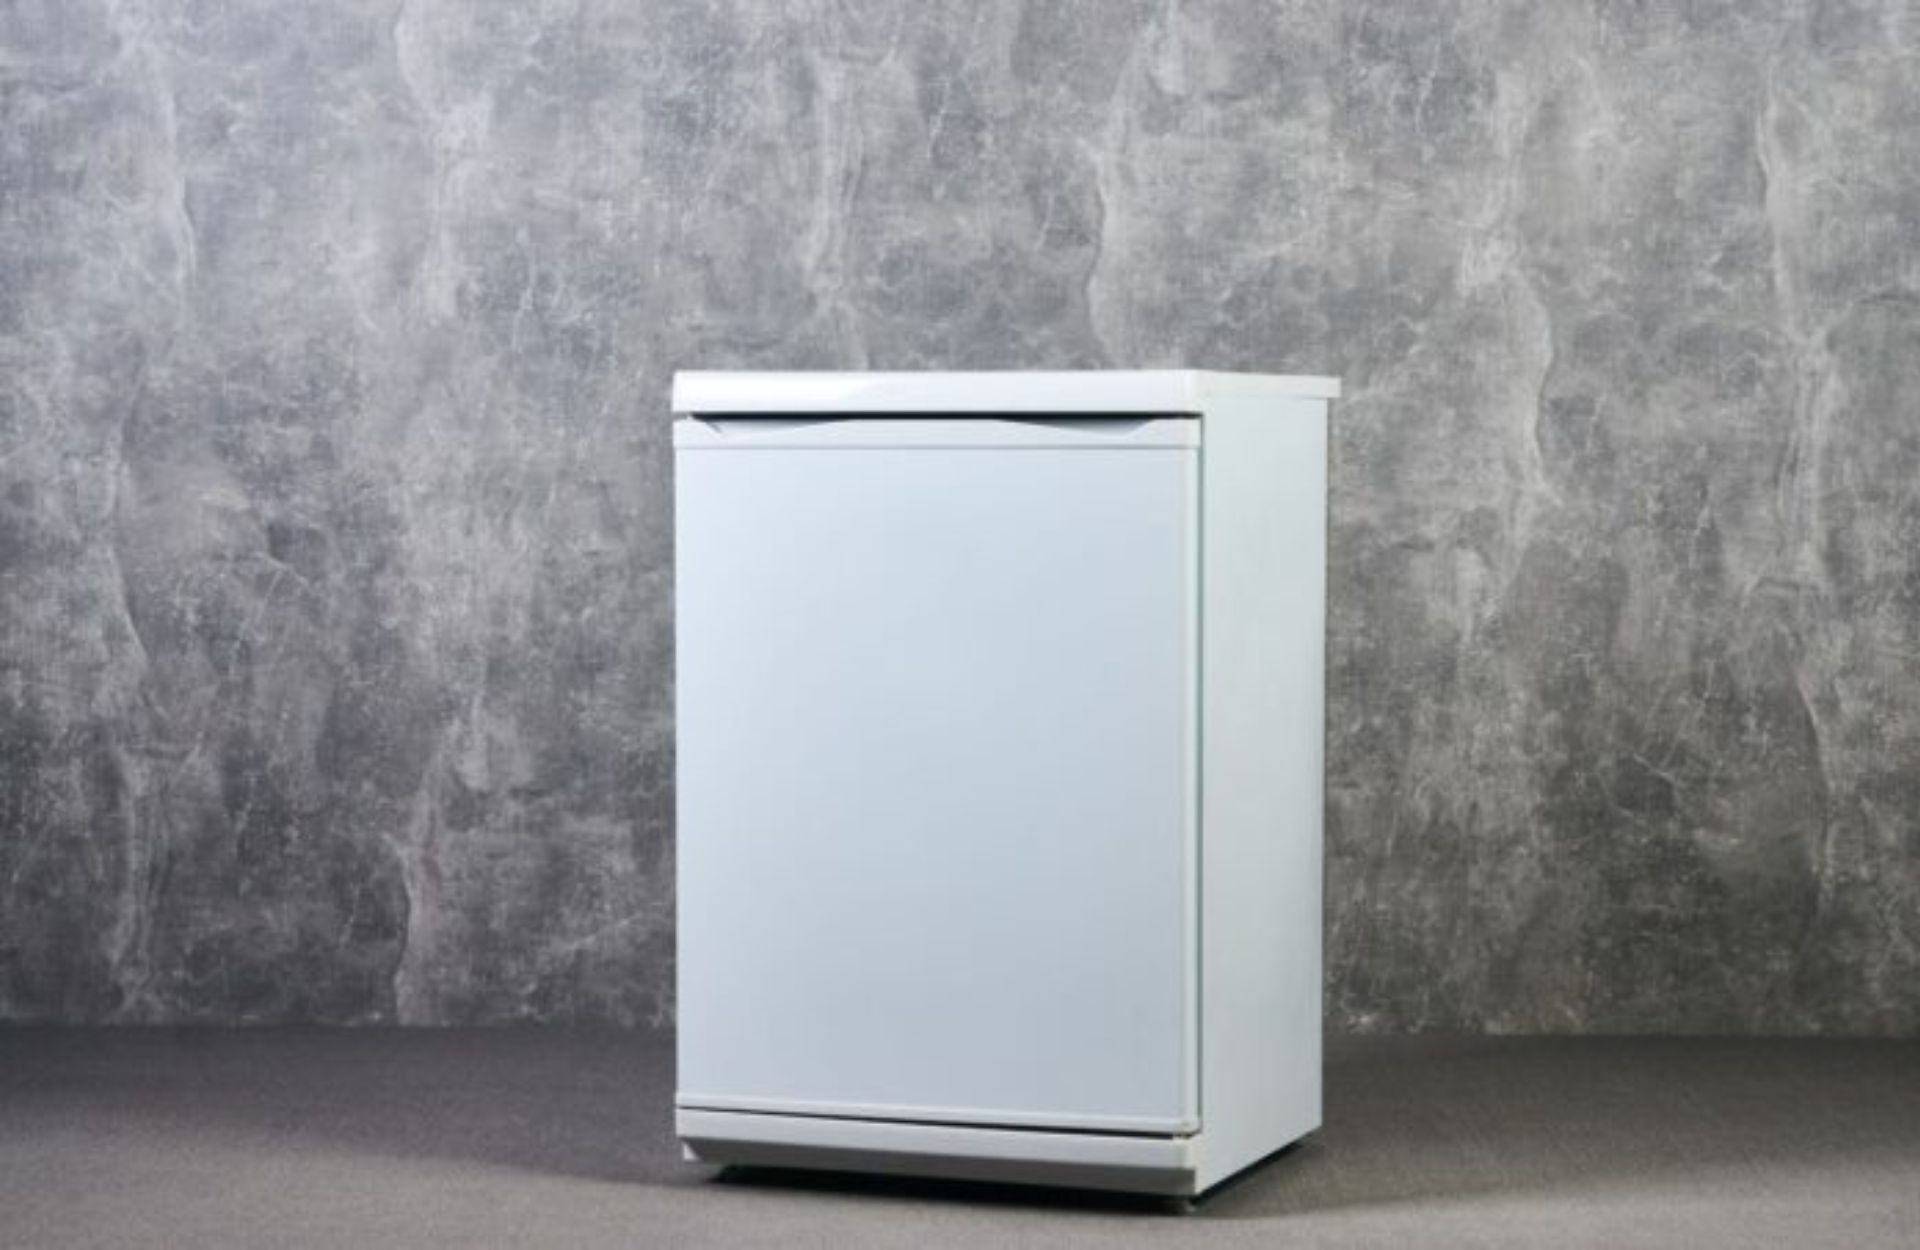 Mini Fridge Temperature Troubleshooting: Keeping Your Cool